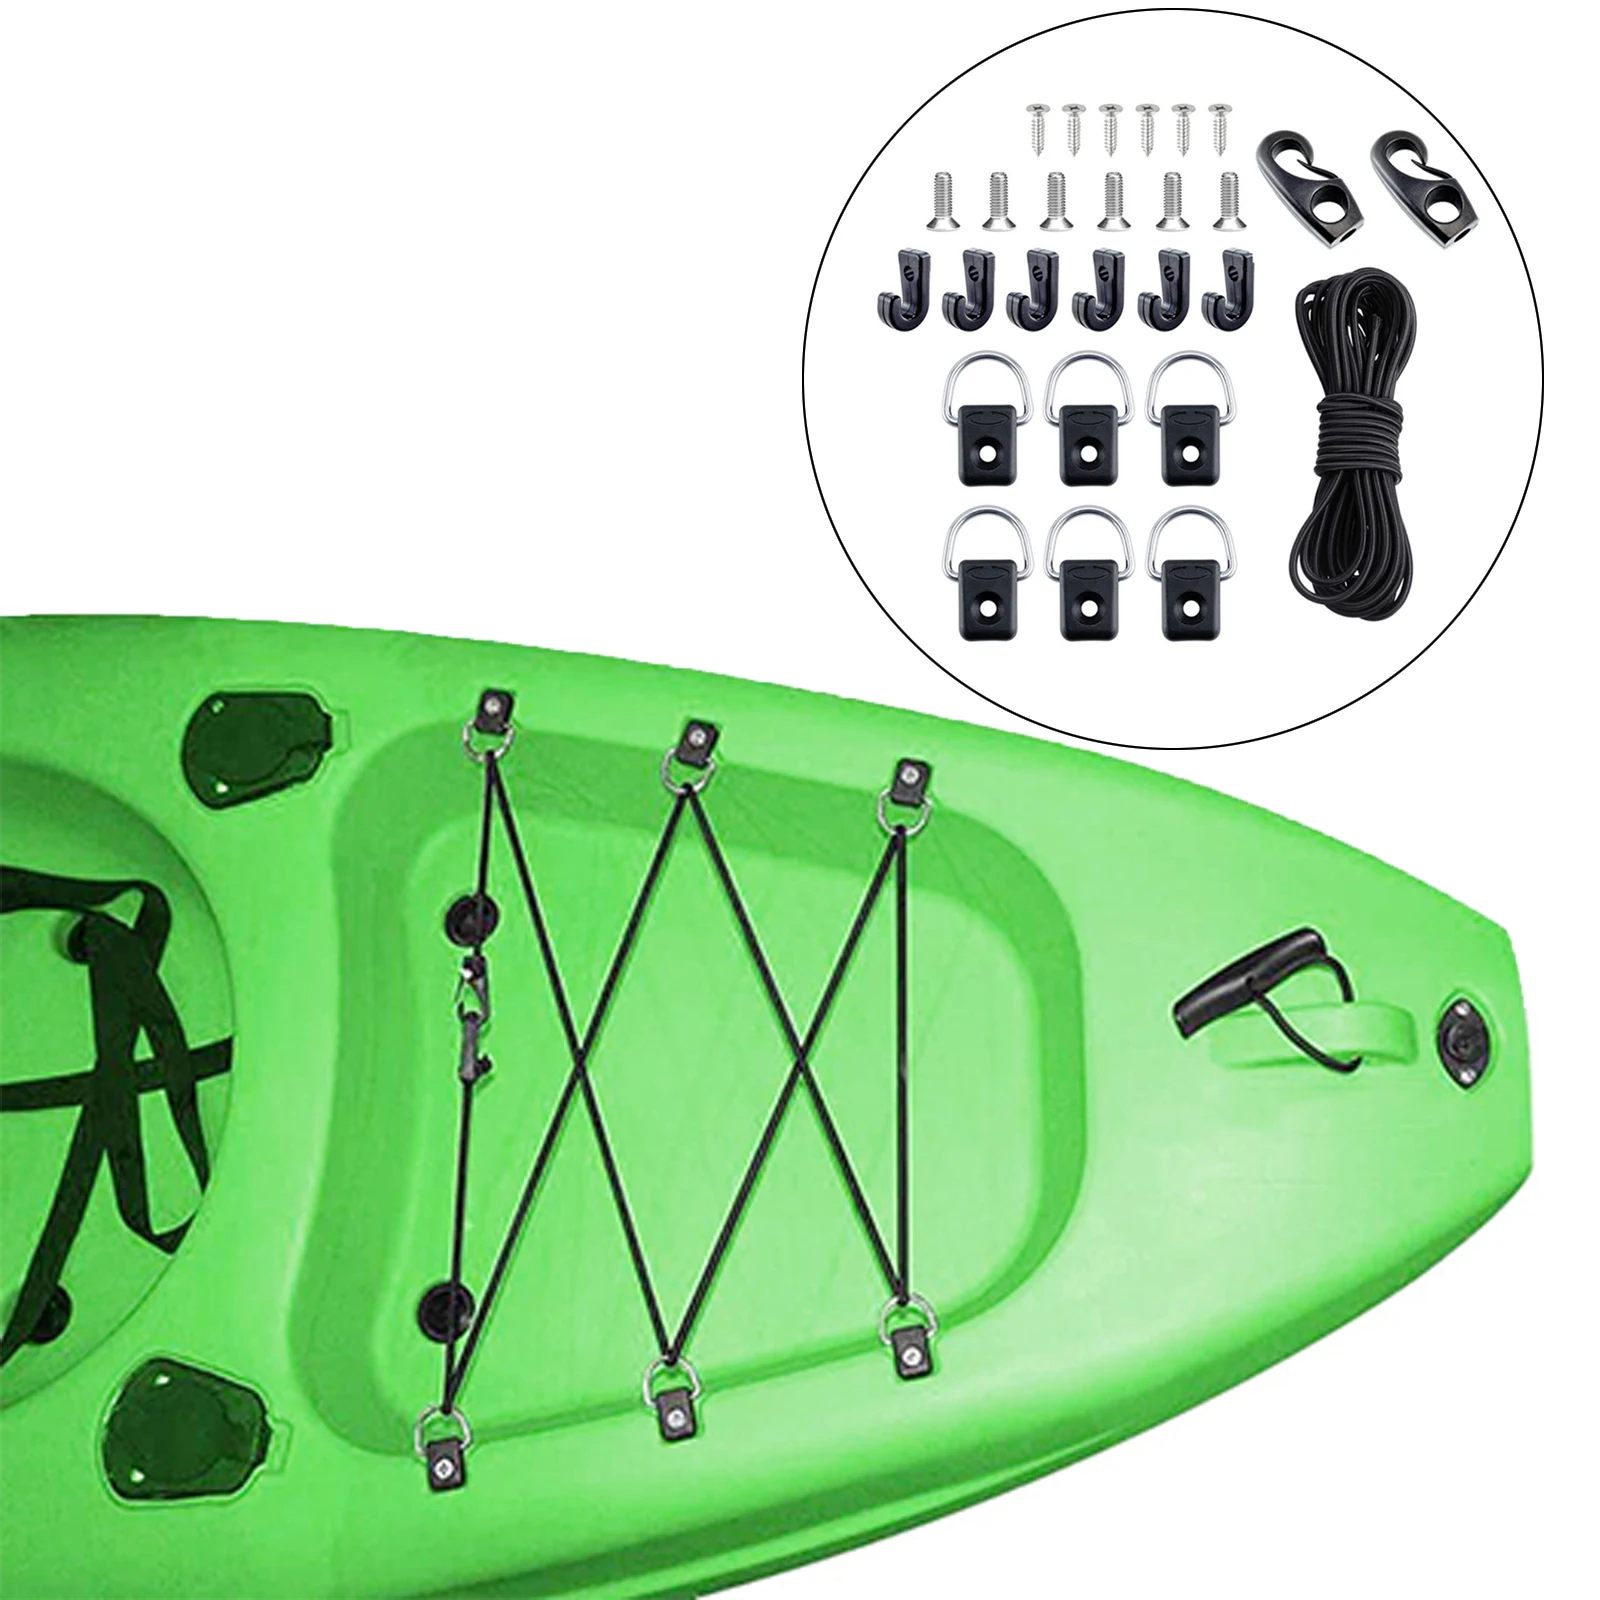 METER STAR 12 Pack of Fishing Rigging D-Ring Kayak with 304 M6 Screw Kit for Boat Canoe Kayak,Give Free Install Tools 